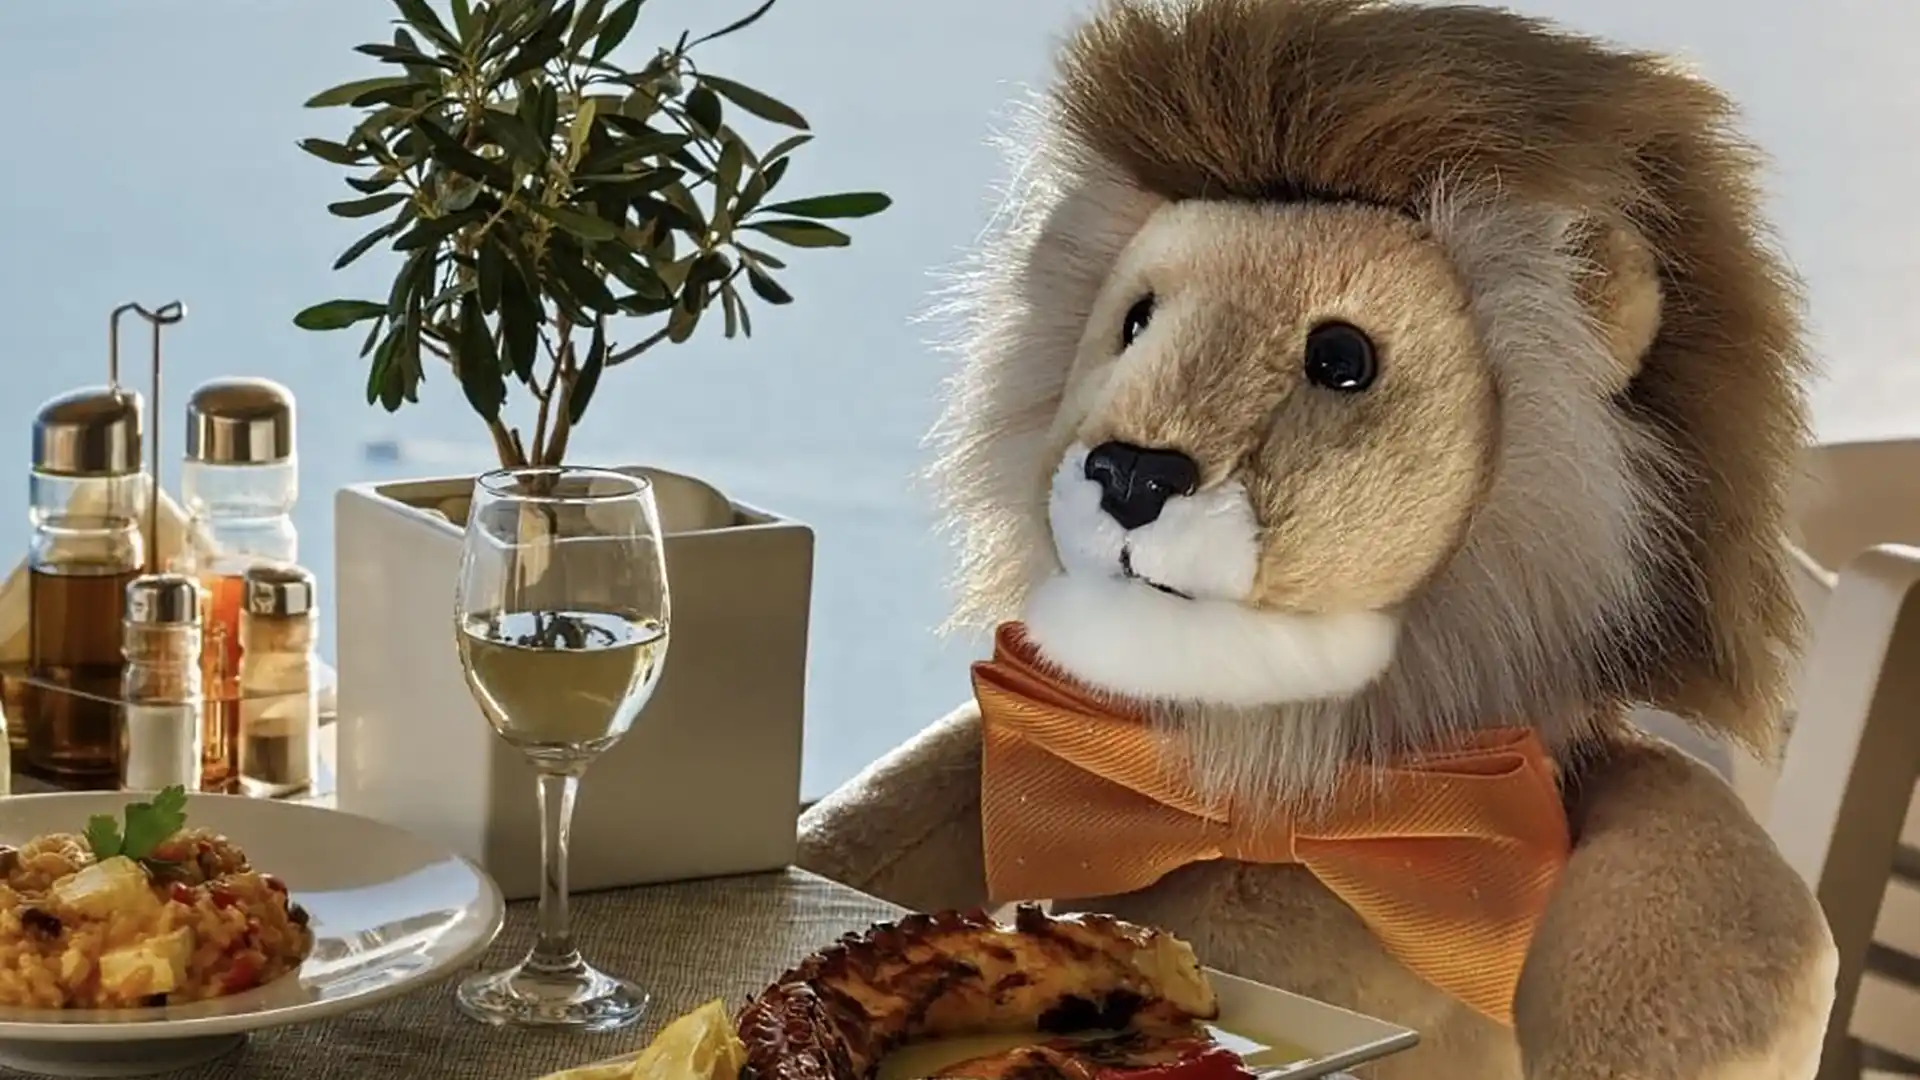 Holland America Line's lion mascot sitting at a dining room table next to large window with fish and rice on a platter.